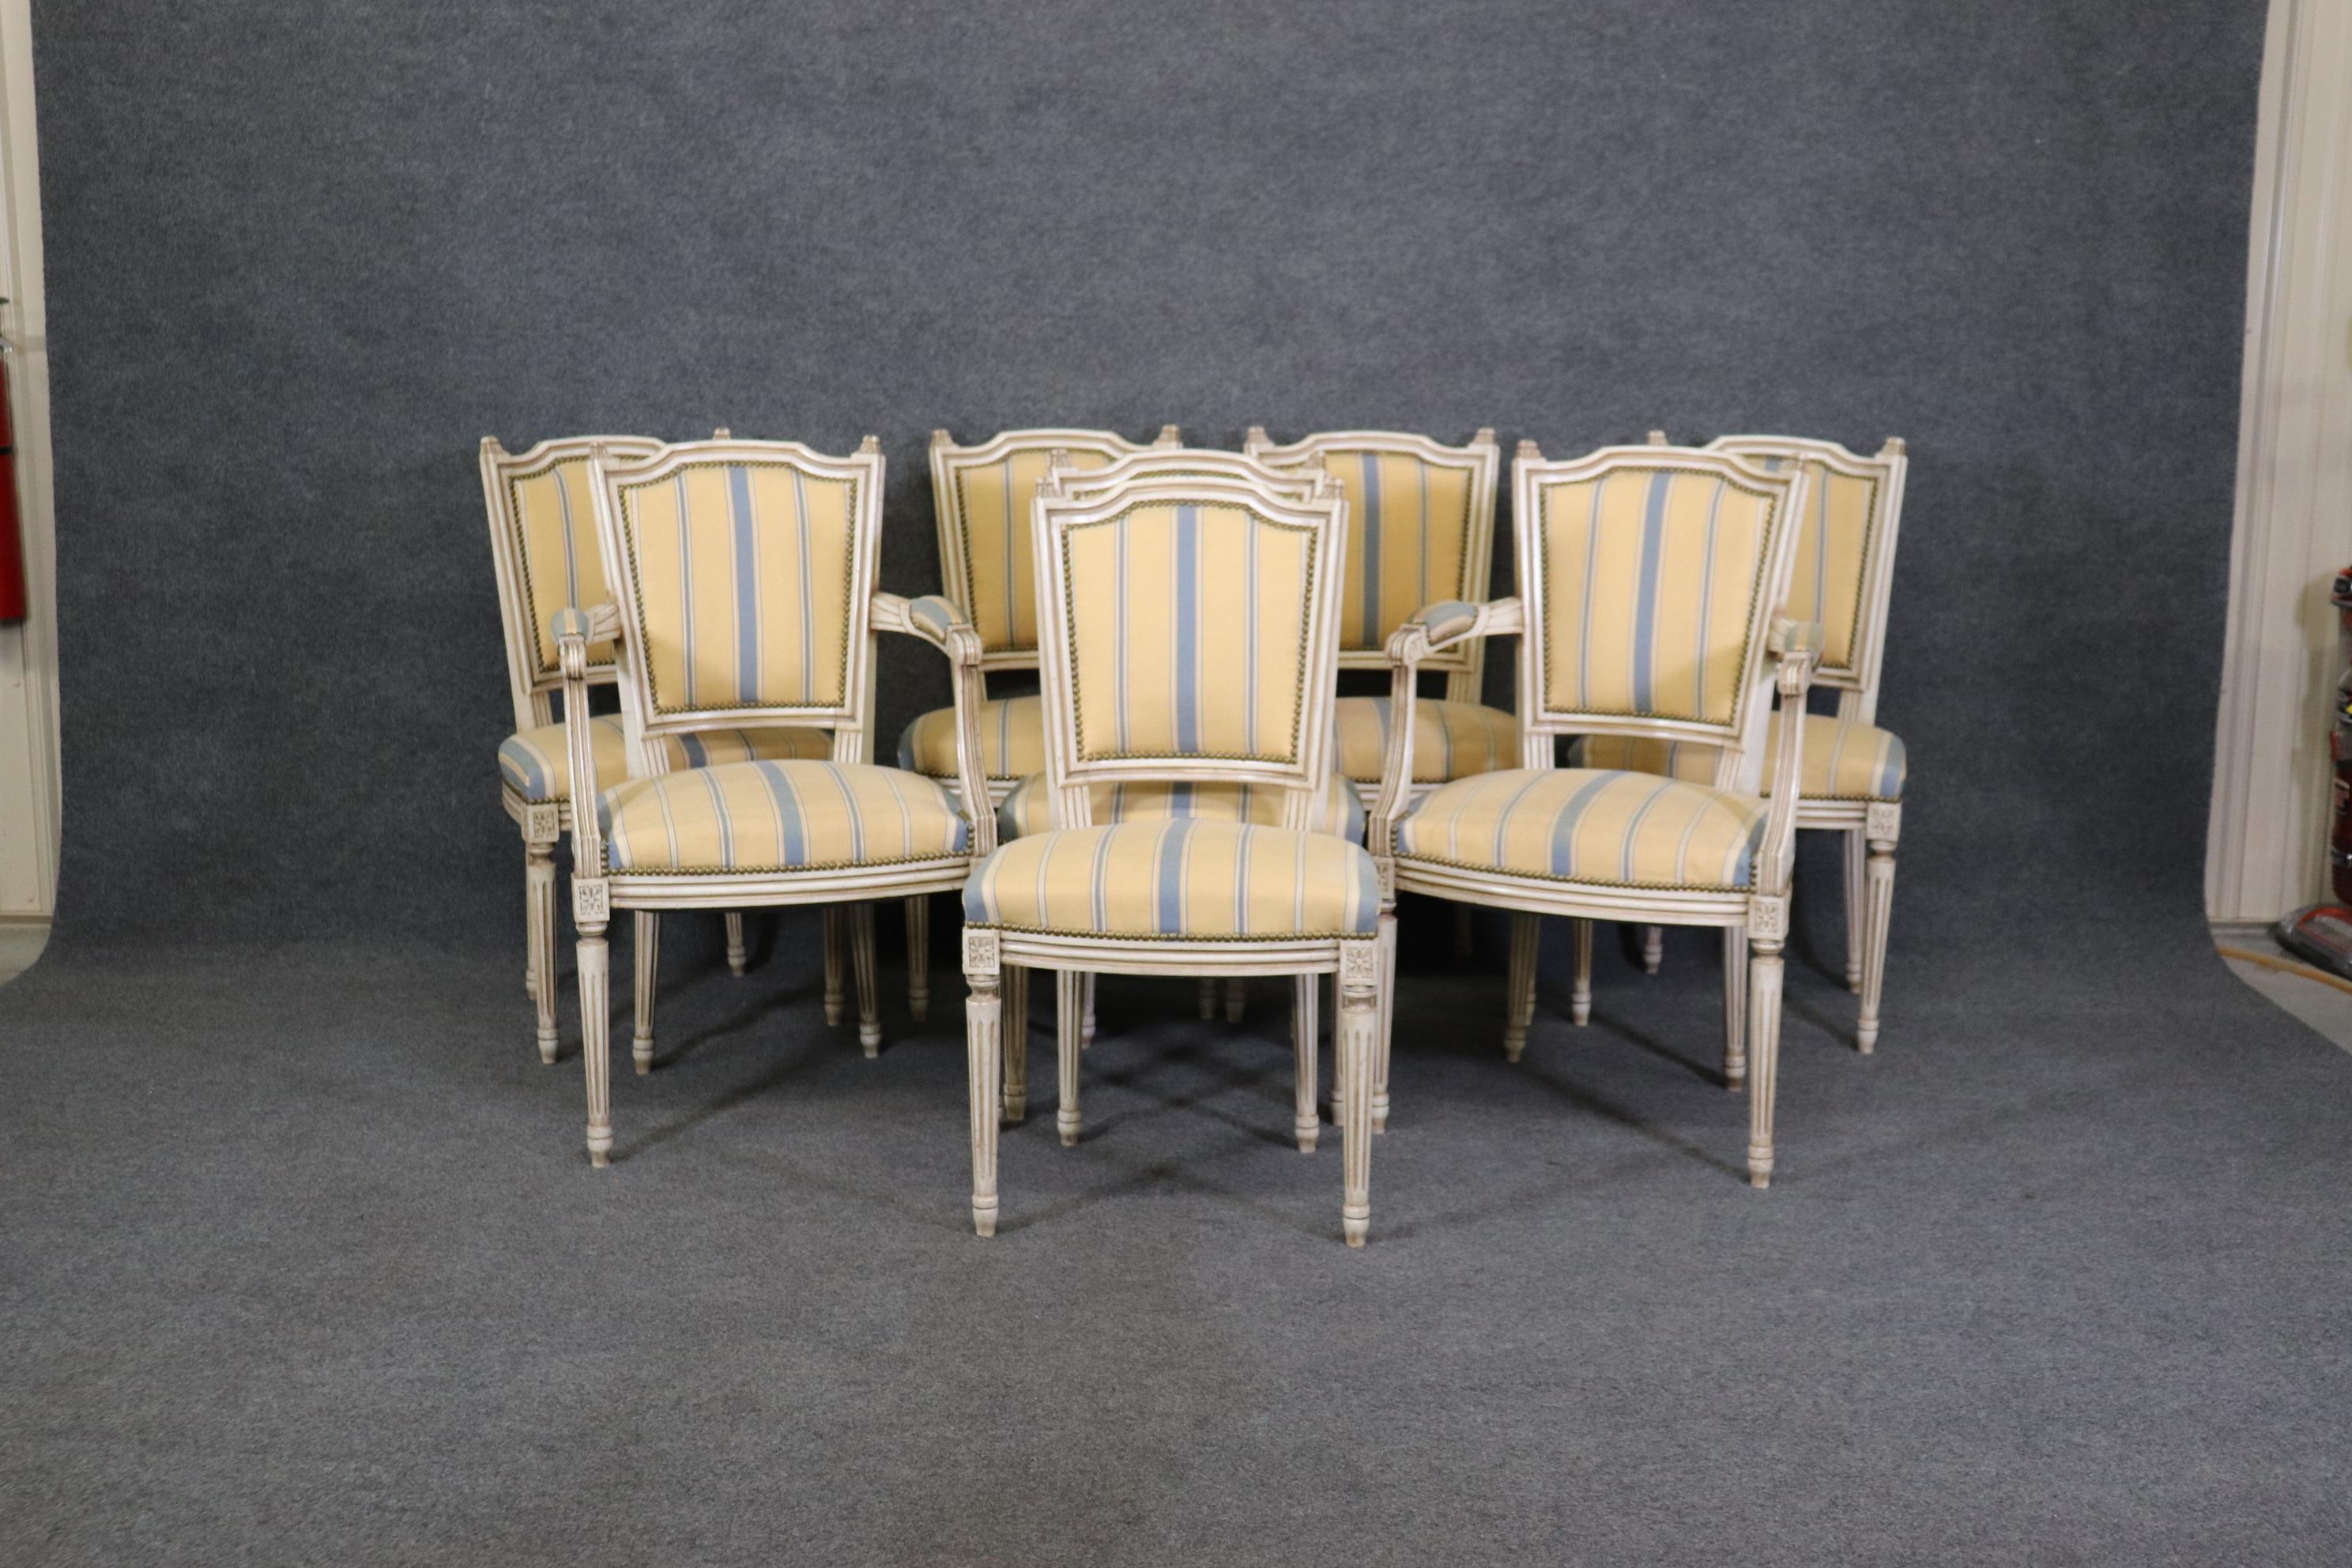 This is a gorgeous set of 8 French-made Louis XVI antique-white painted dining chairs. The chairs are of the highest quality and while not marked, could be Maison Jansen as they didn't mark everything they made. The chairs have beautiful, strong and